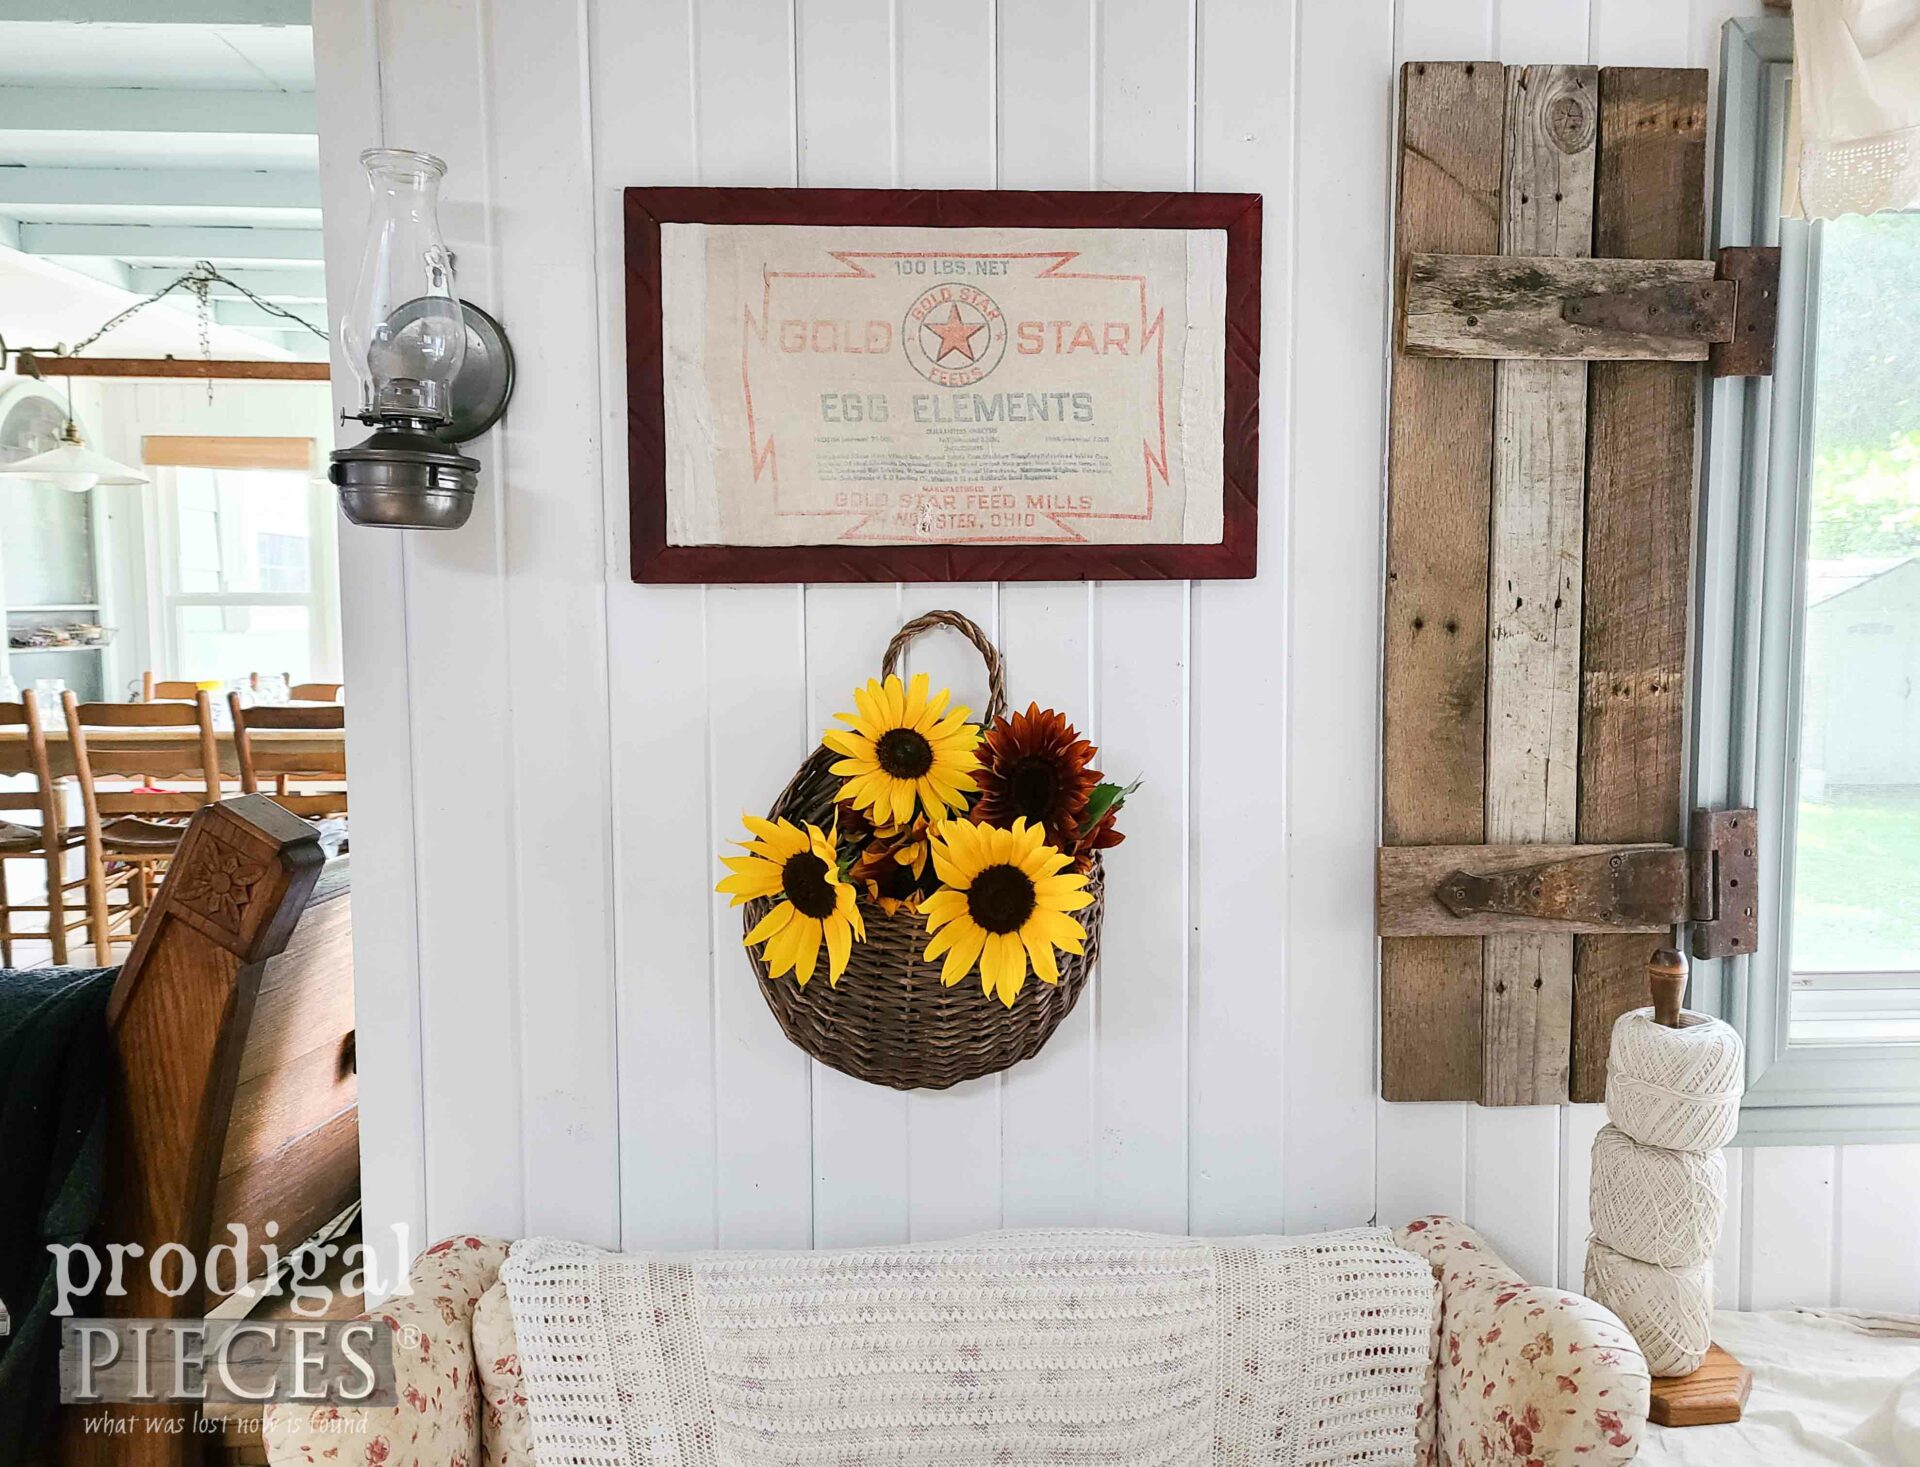 DIY Feed Sack Art using a thrifted frame by Larissa of Prodigal Pieces | prodigalpieces.com #prodigalpieces #rustic #farmhouse